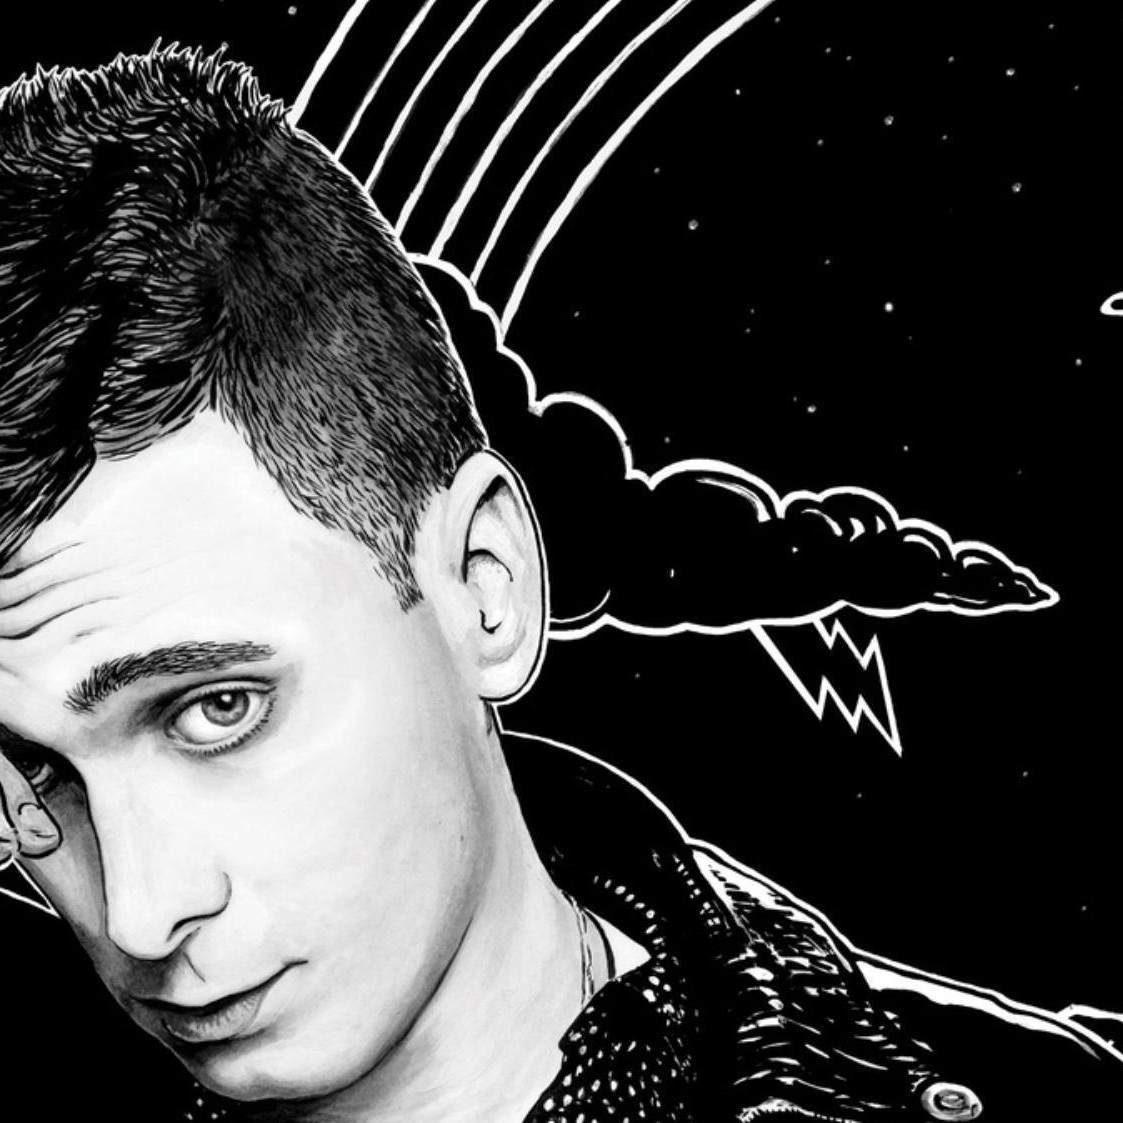 why is hedi slimane so inspired by la?